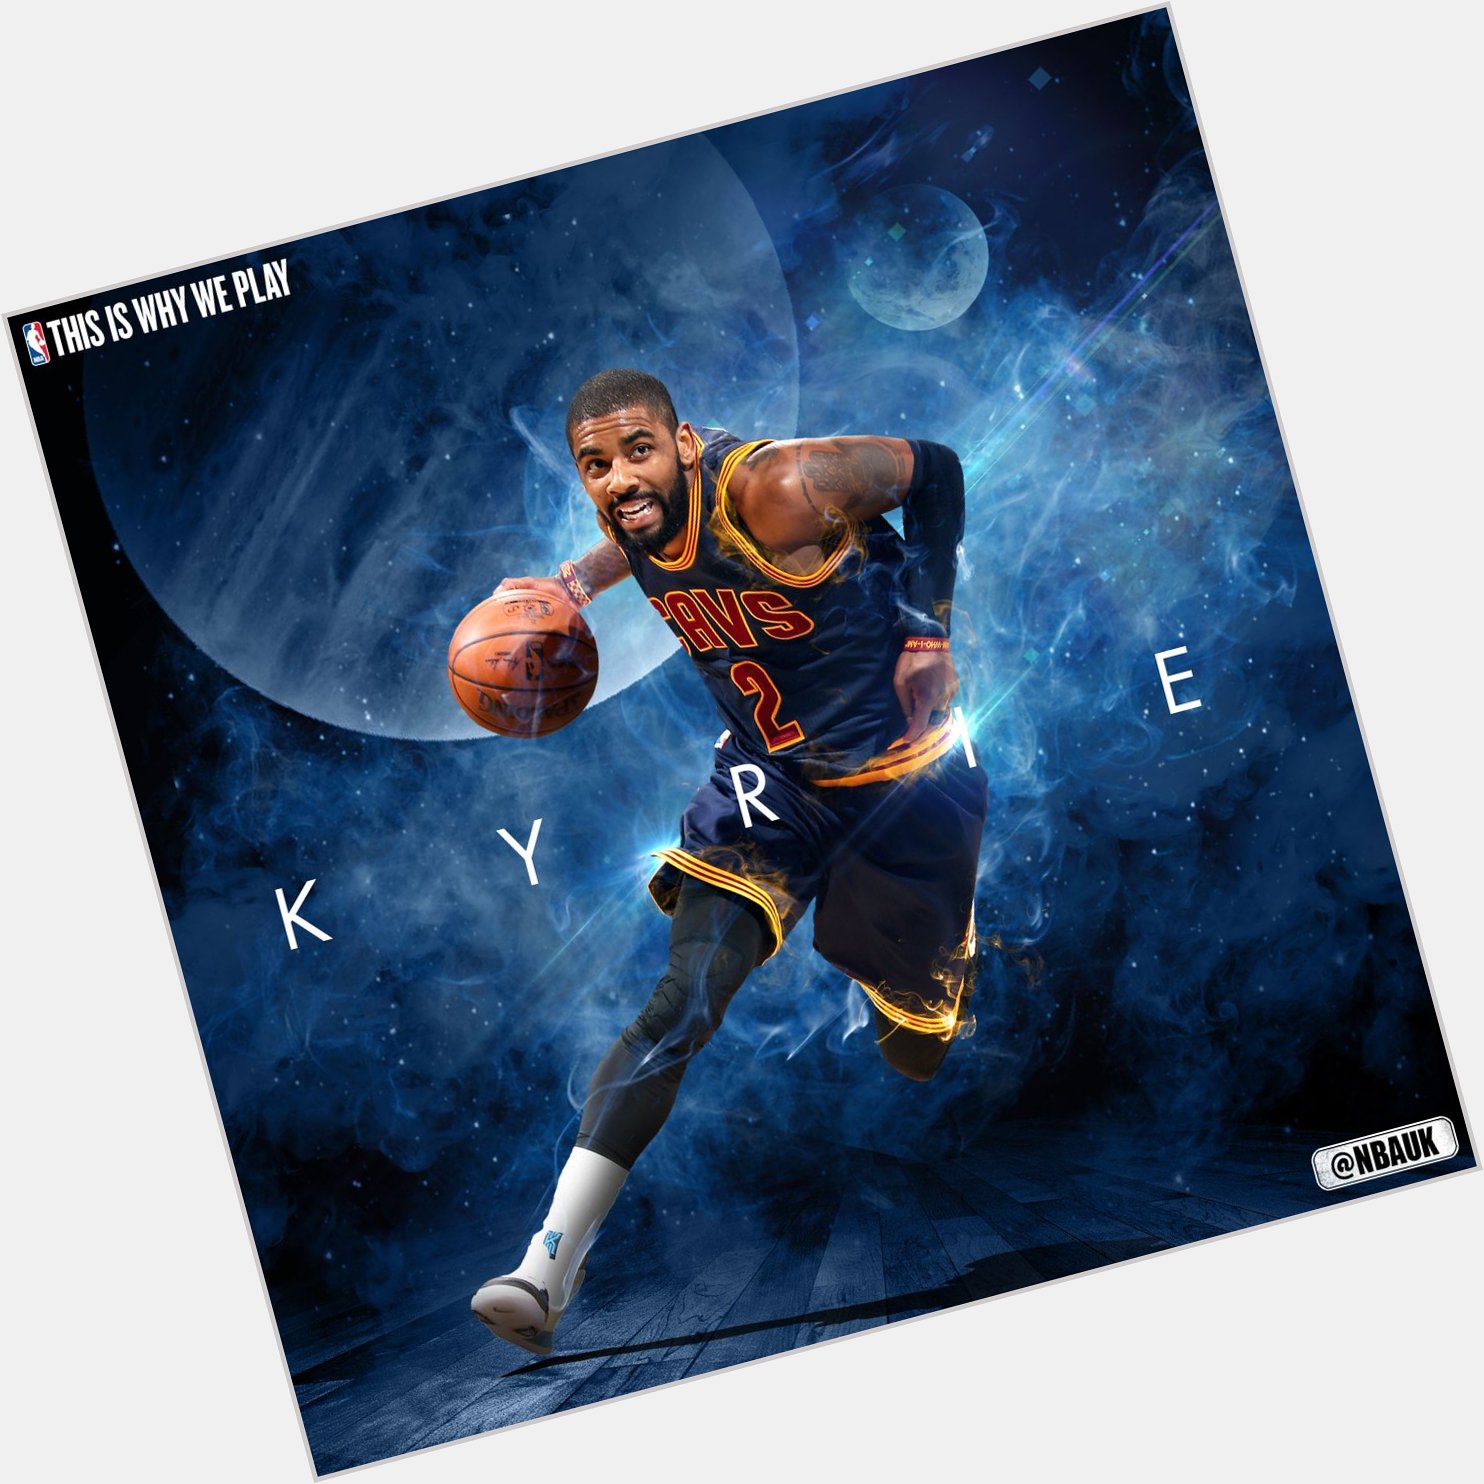  Join us in wishing 4x NBA All-Star and NBA Champion Kyrie Irving a very happy birthday! 